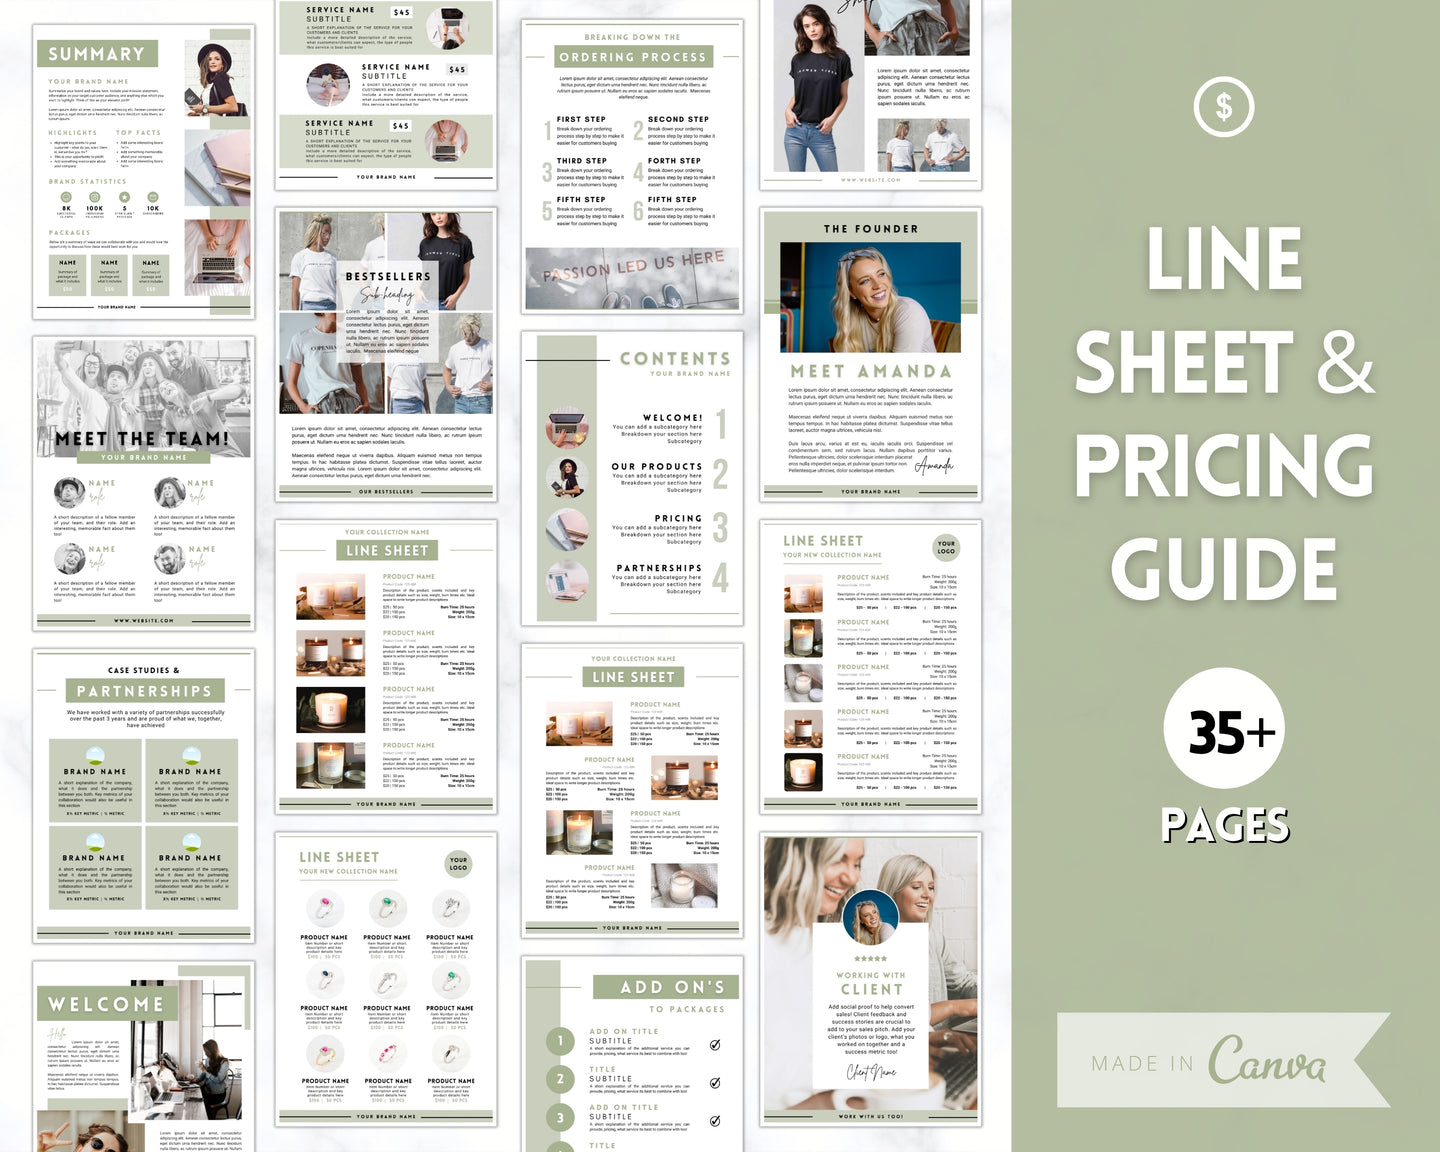 35 Editable Line Sheet Templates | Canva Wholesale Product Catalog, Pricing & Services Guide & Price List Template, Linesheet Catalogue | Green